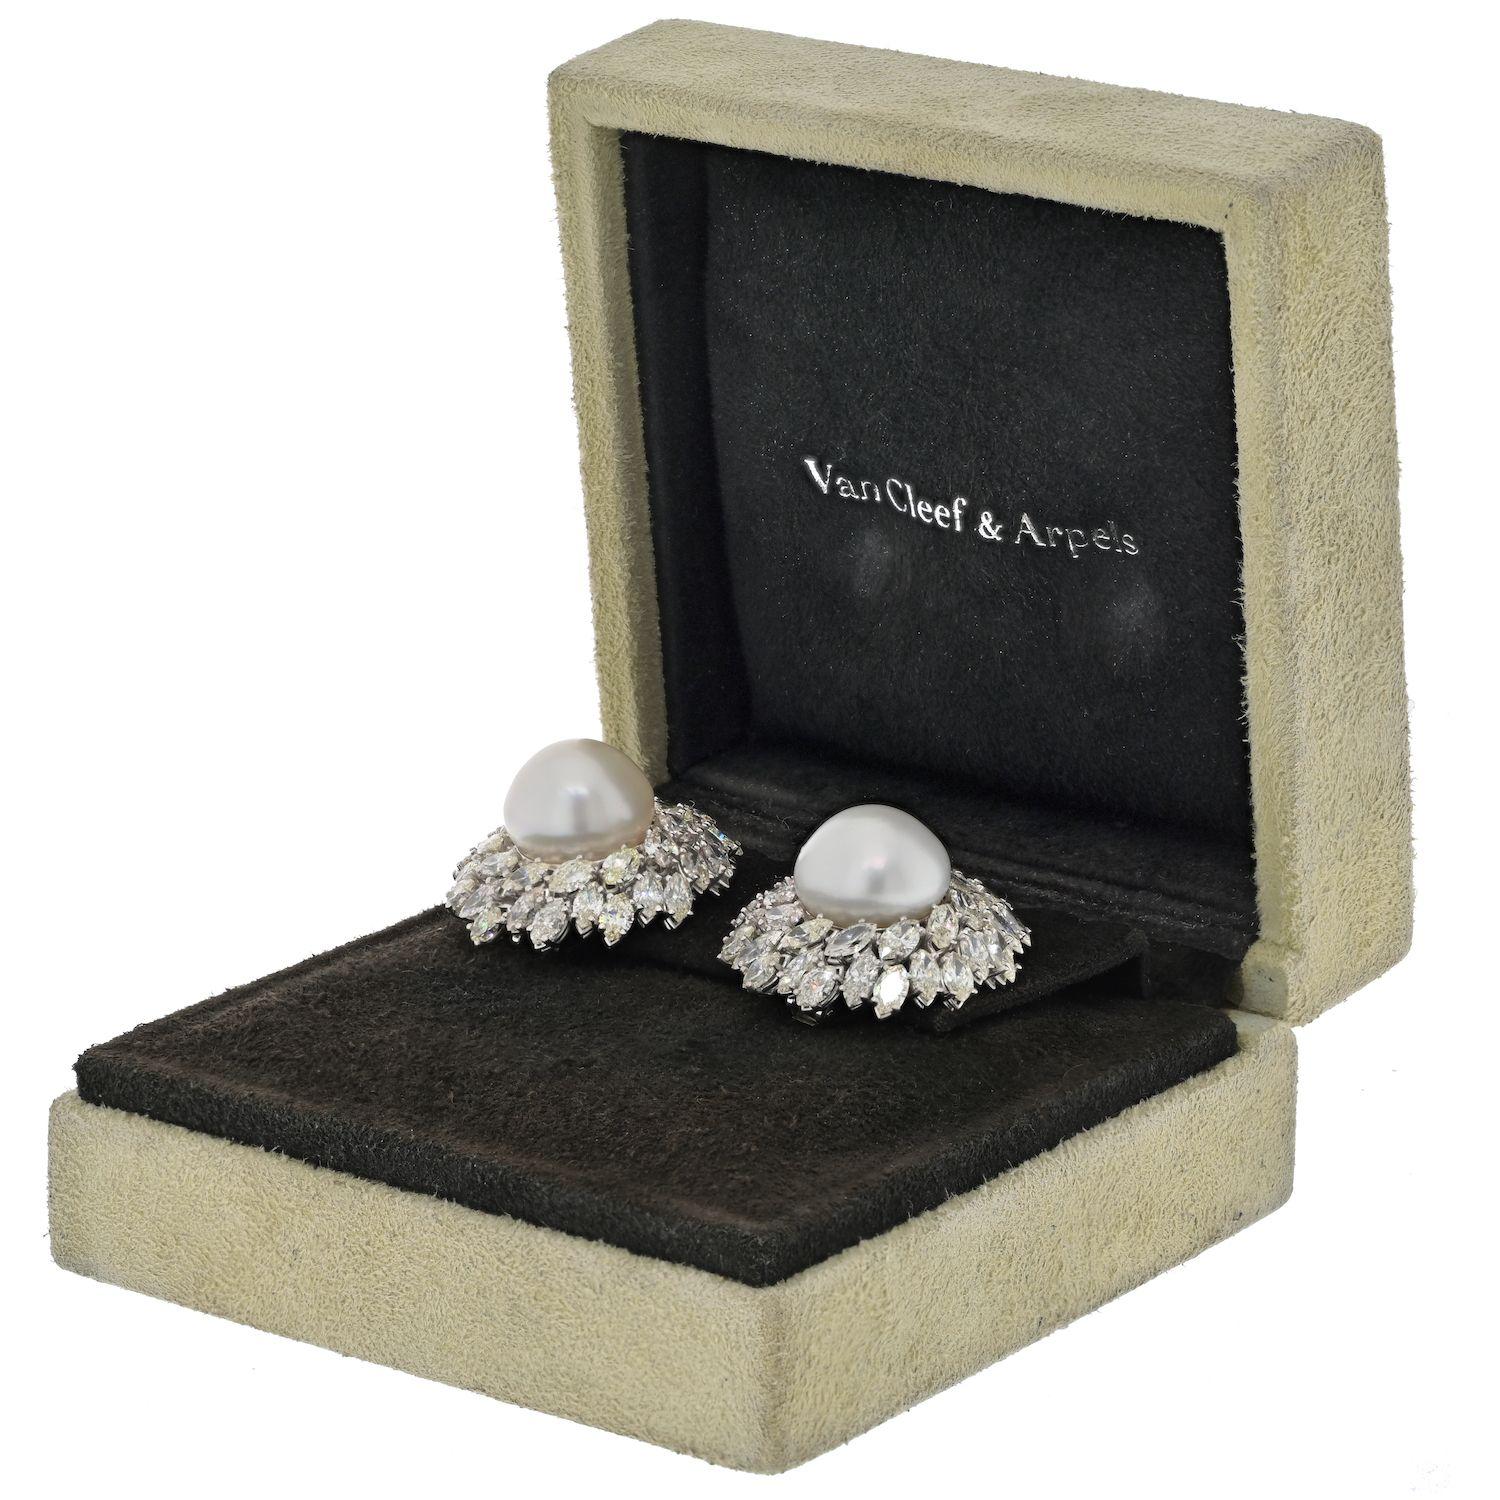 Van Cleef & Arpels 18K White Gold Pearl Diamond Bombe Earrings In Excellent Condition For Sale In New York, NY